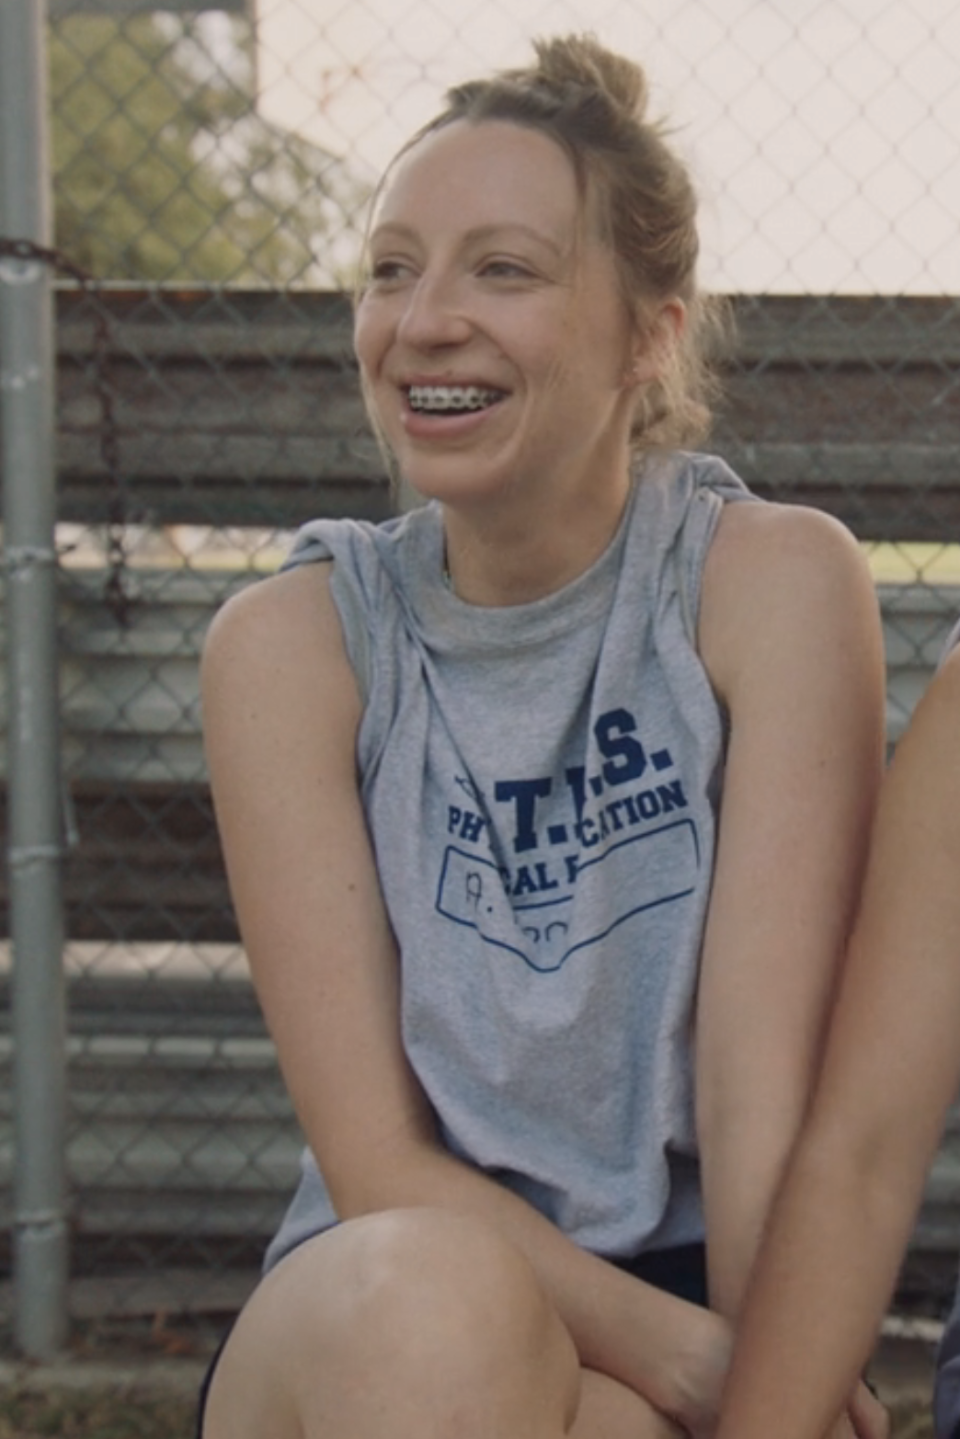 Anna in scene in gym clothes